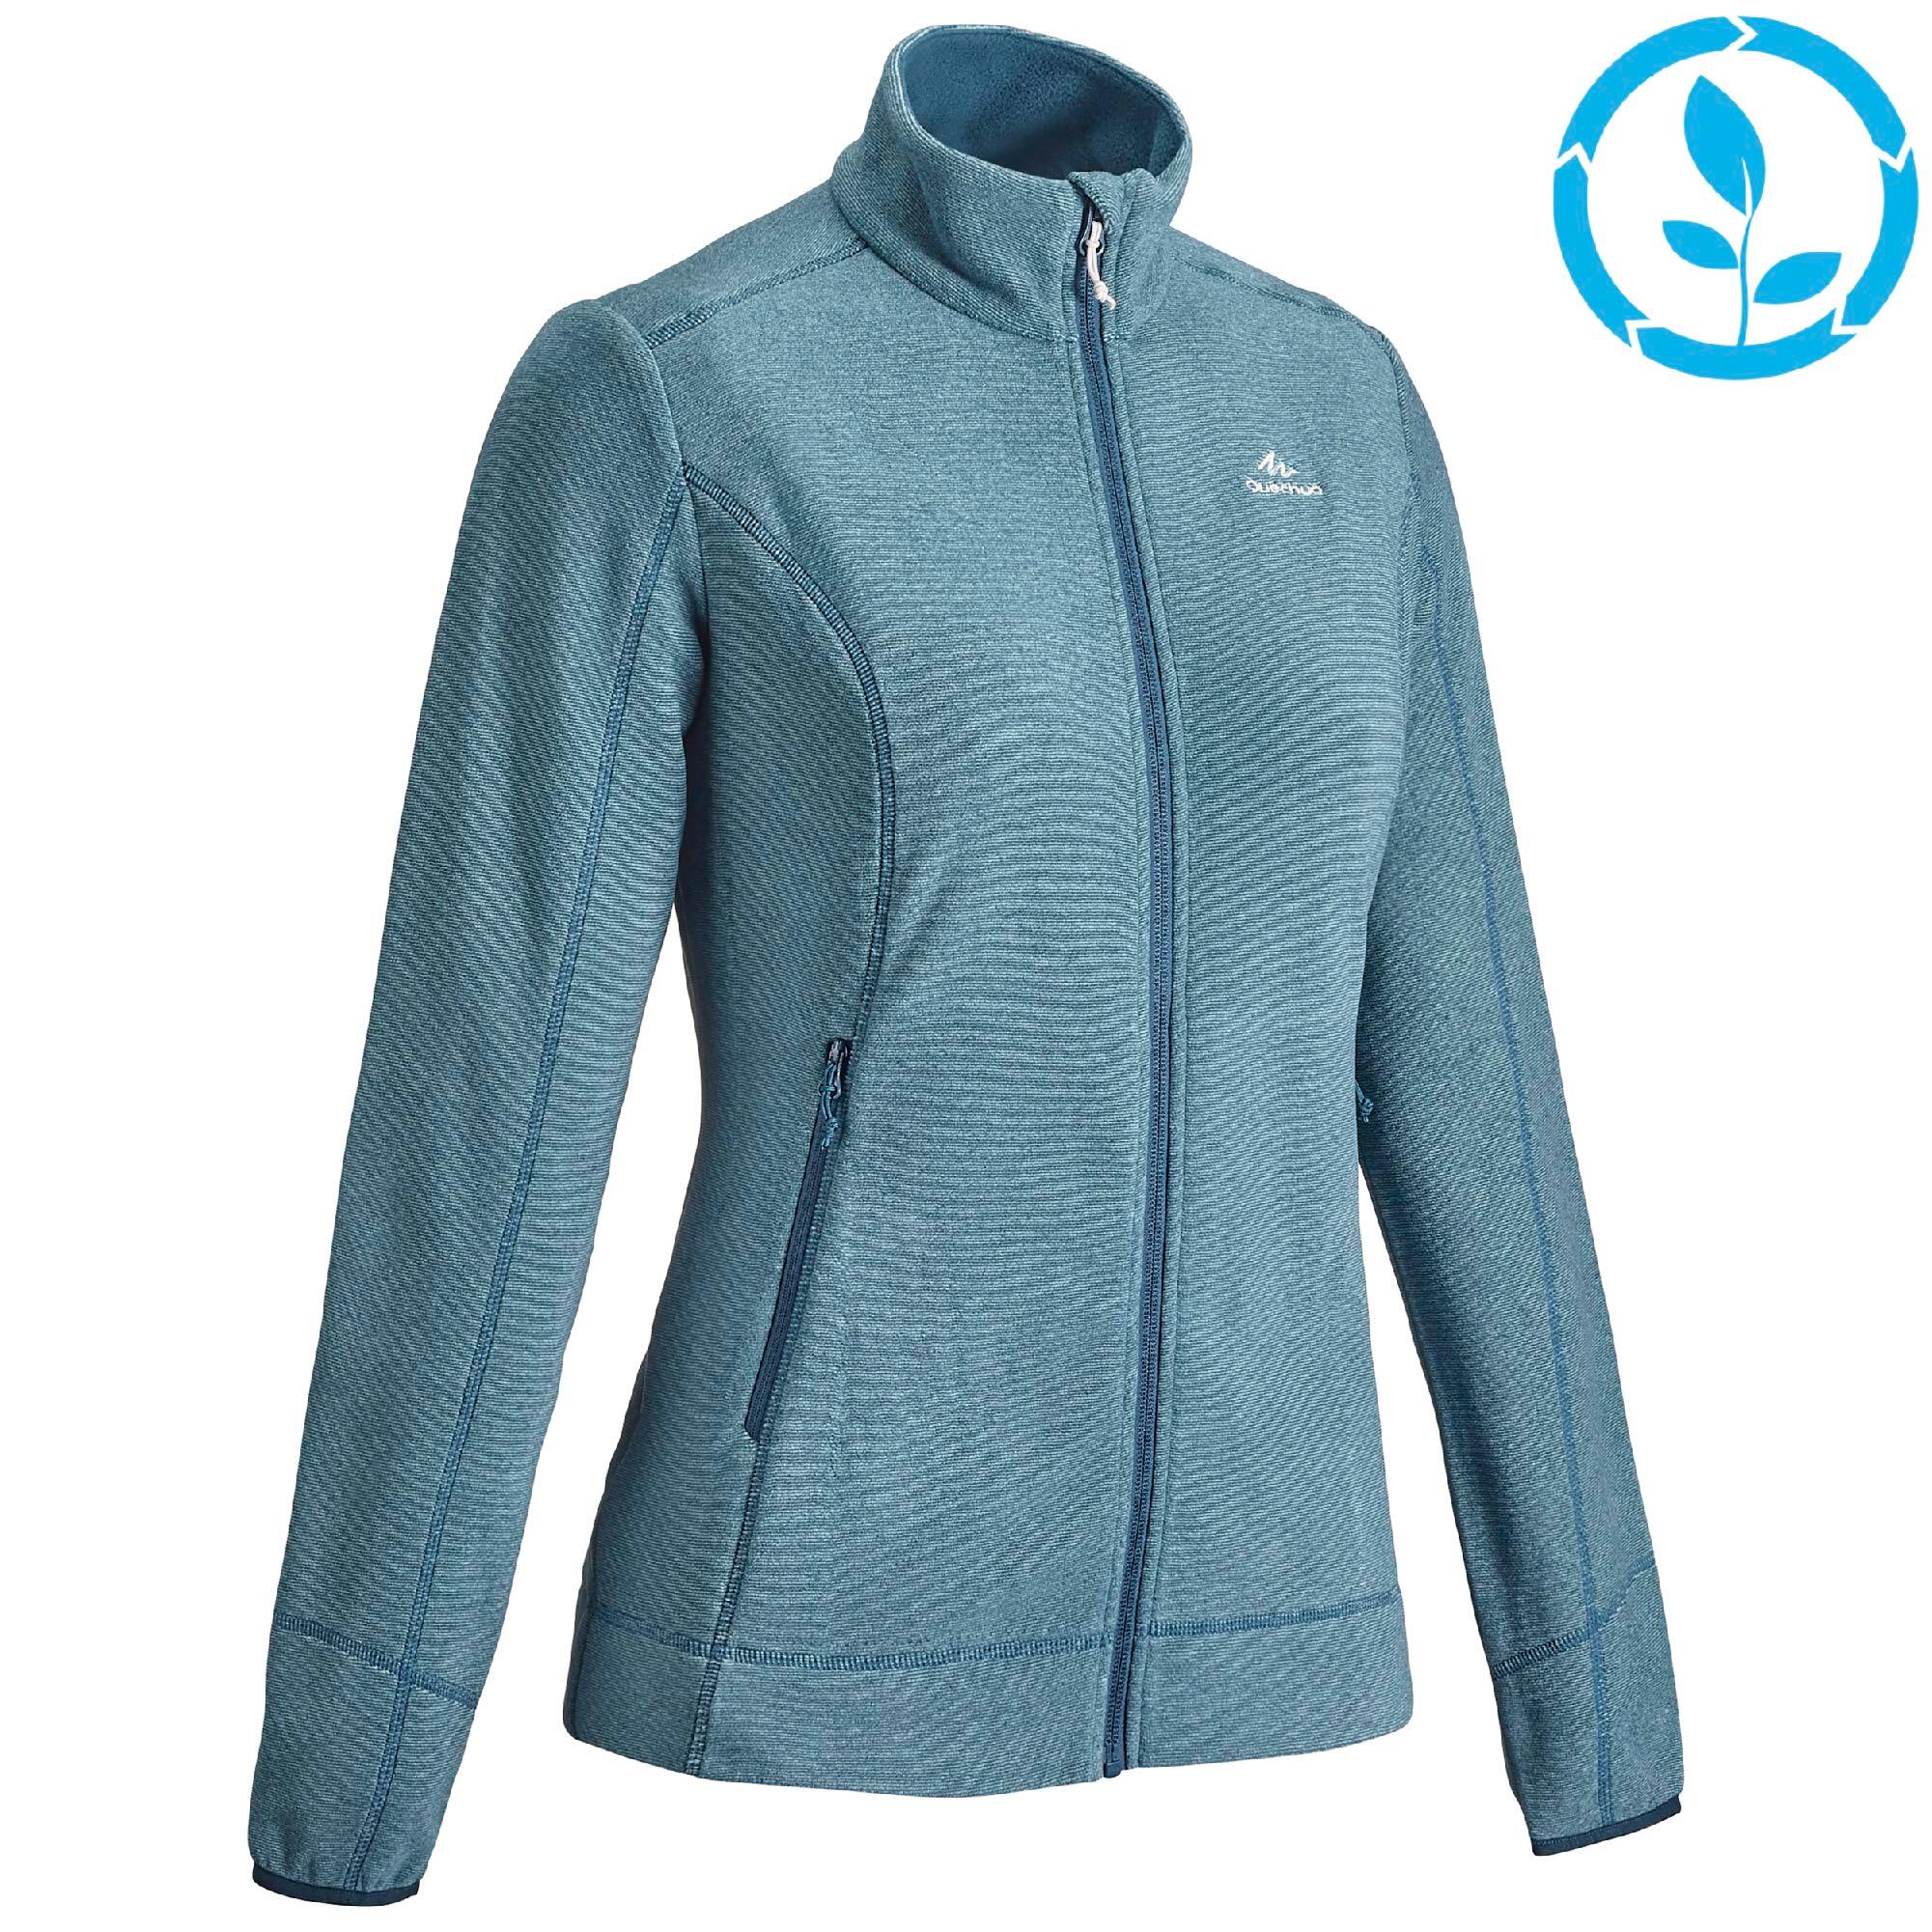 Buy Winter Collection from Decathlon India